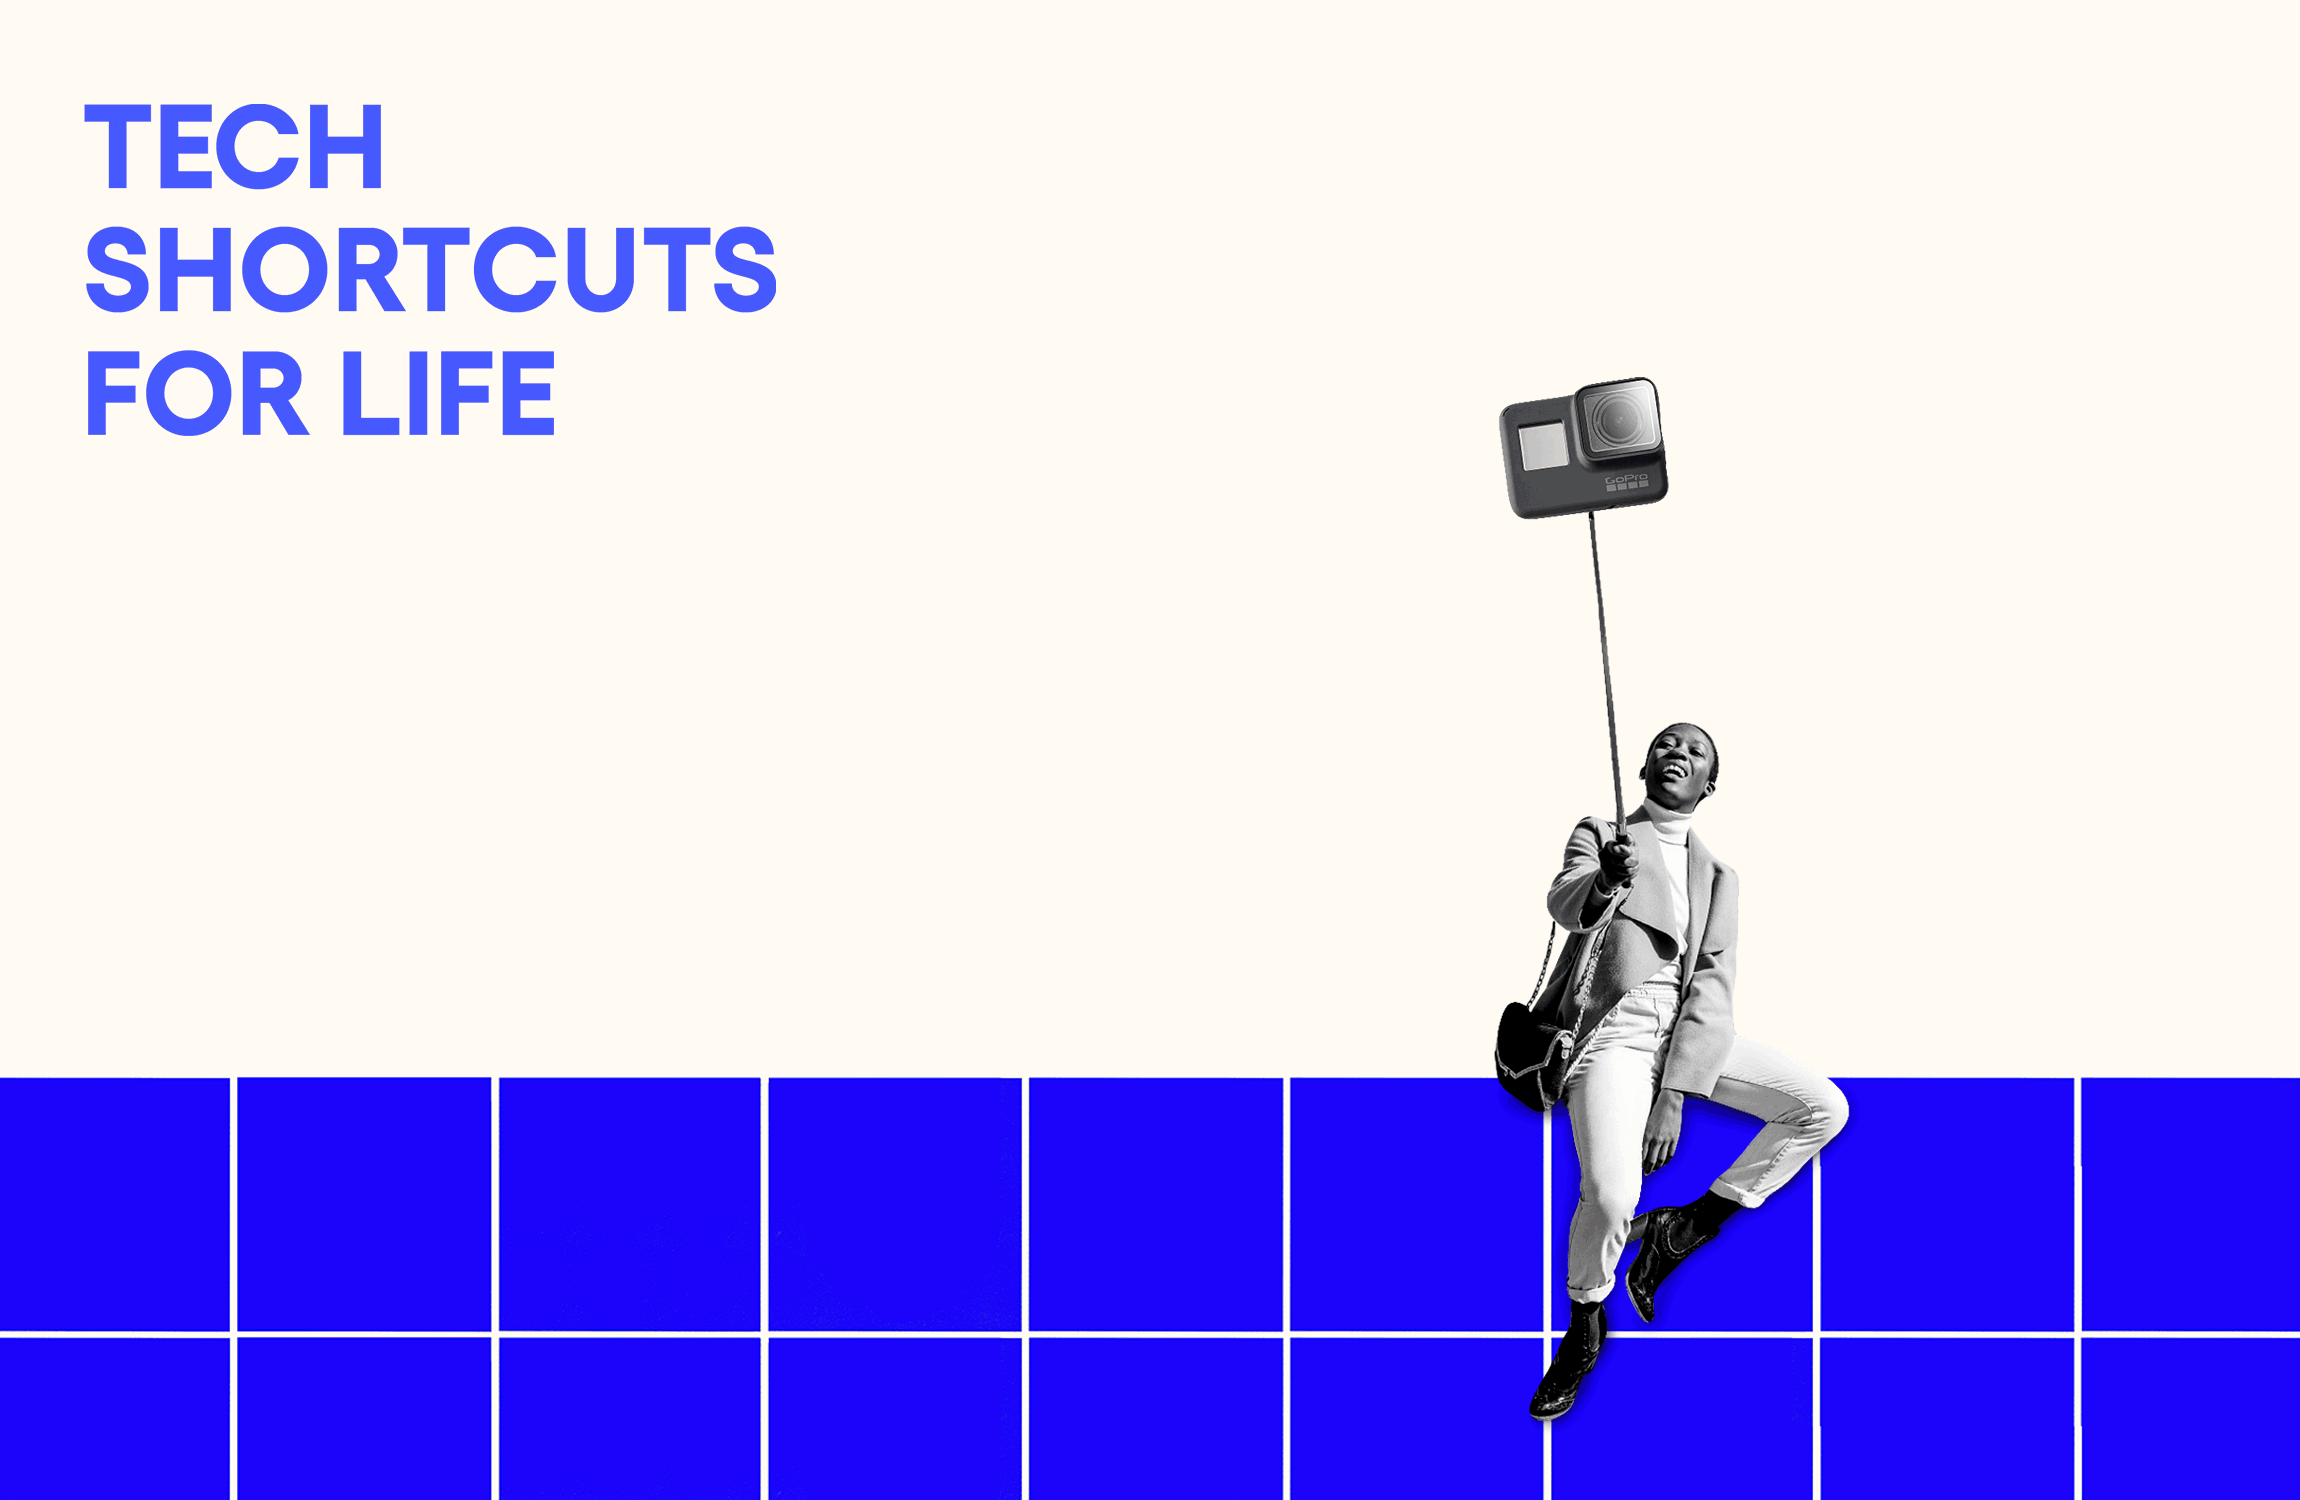 “TECH SHORTCUTS FOR LIFE” in blue at the top left and a black and white photo of a person with an elongating selfie stick.